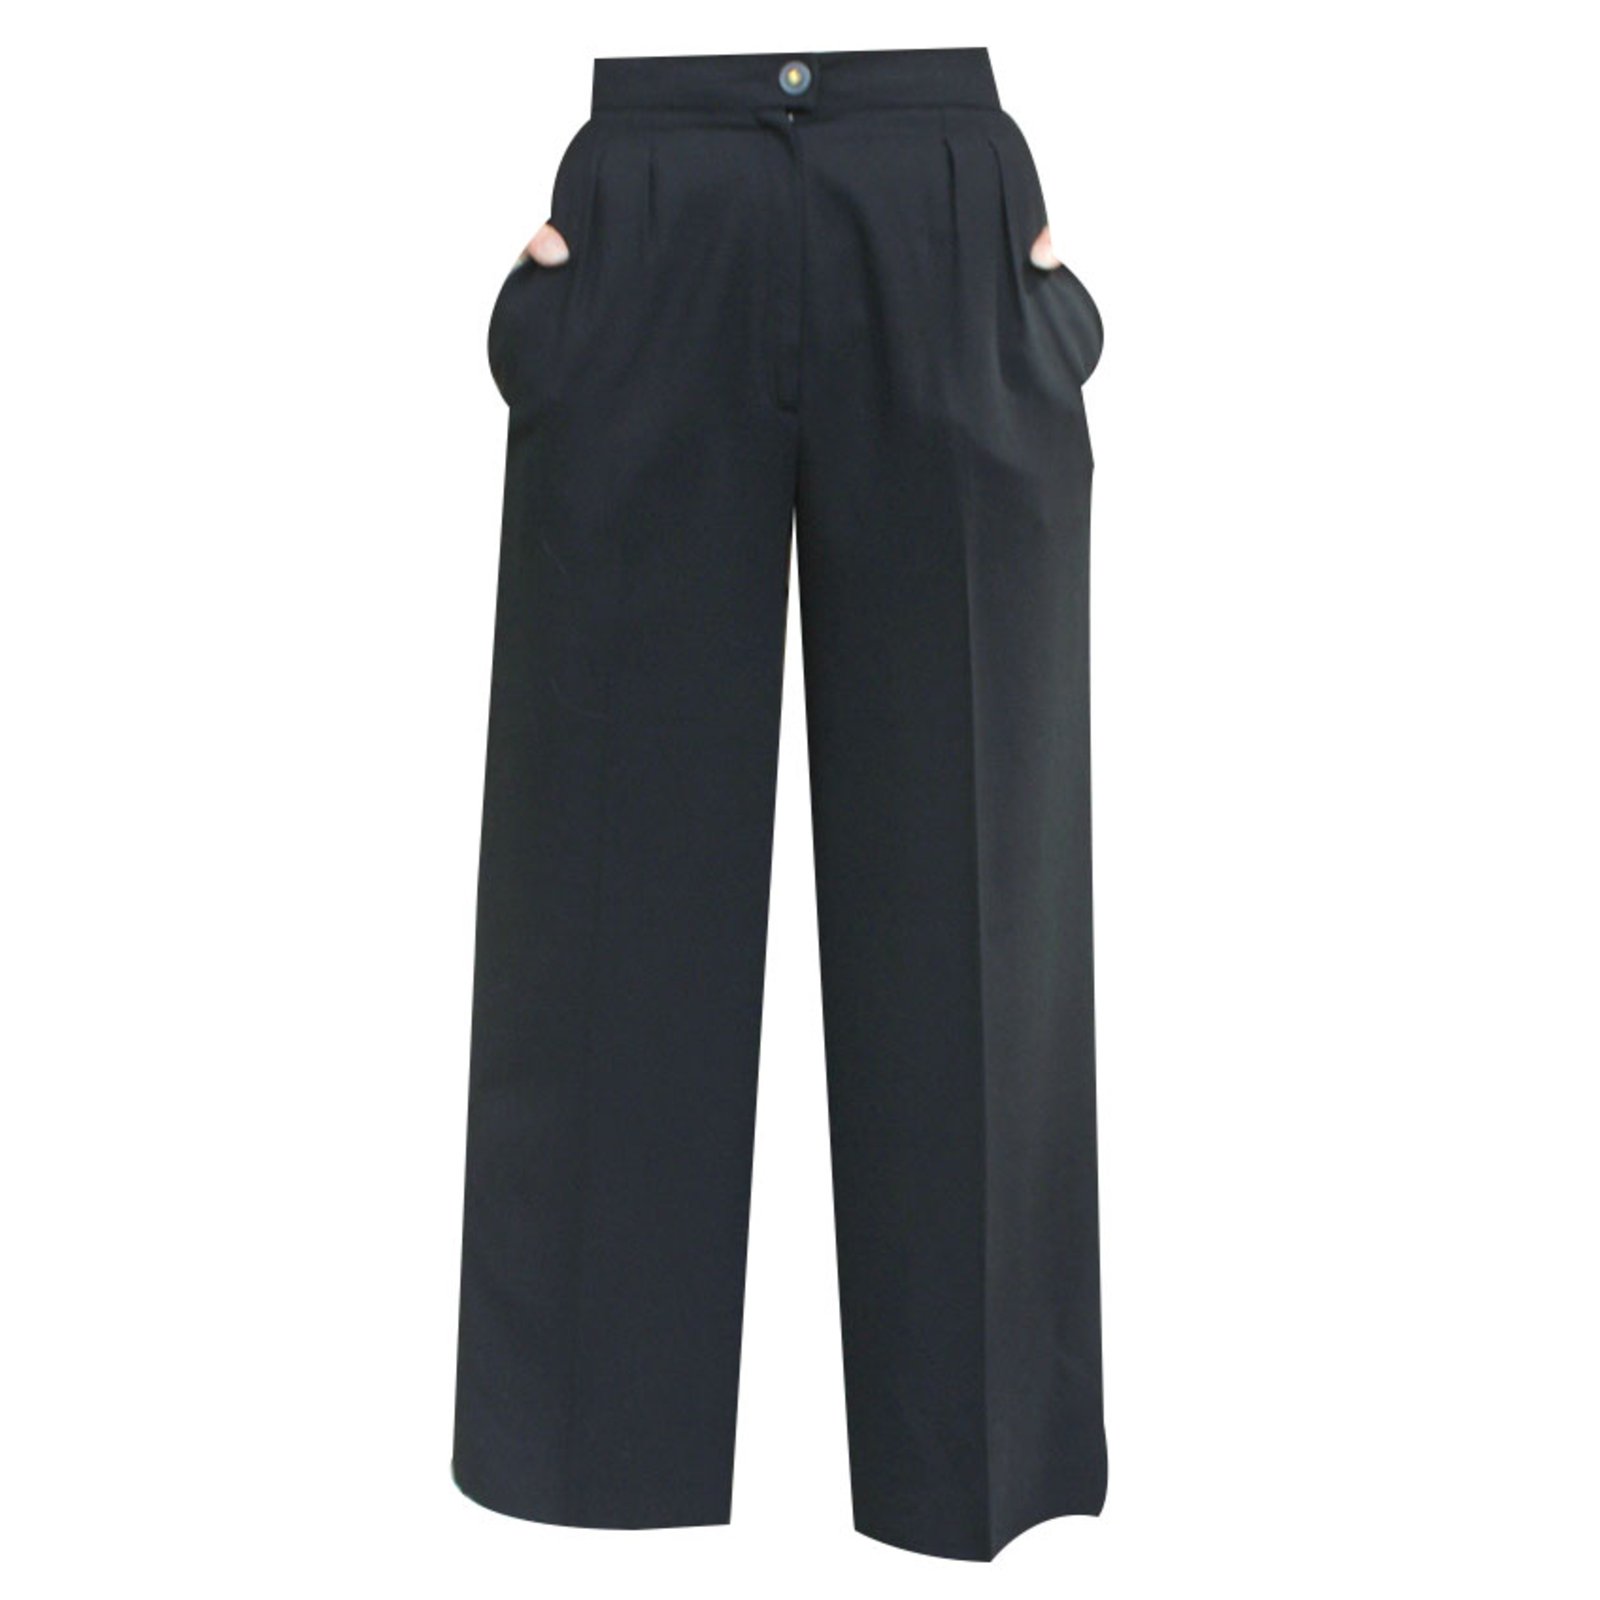 The perfect year-round chanel pants vintage 90s black wool/silk high ...